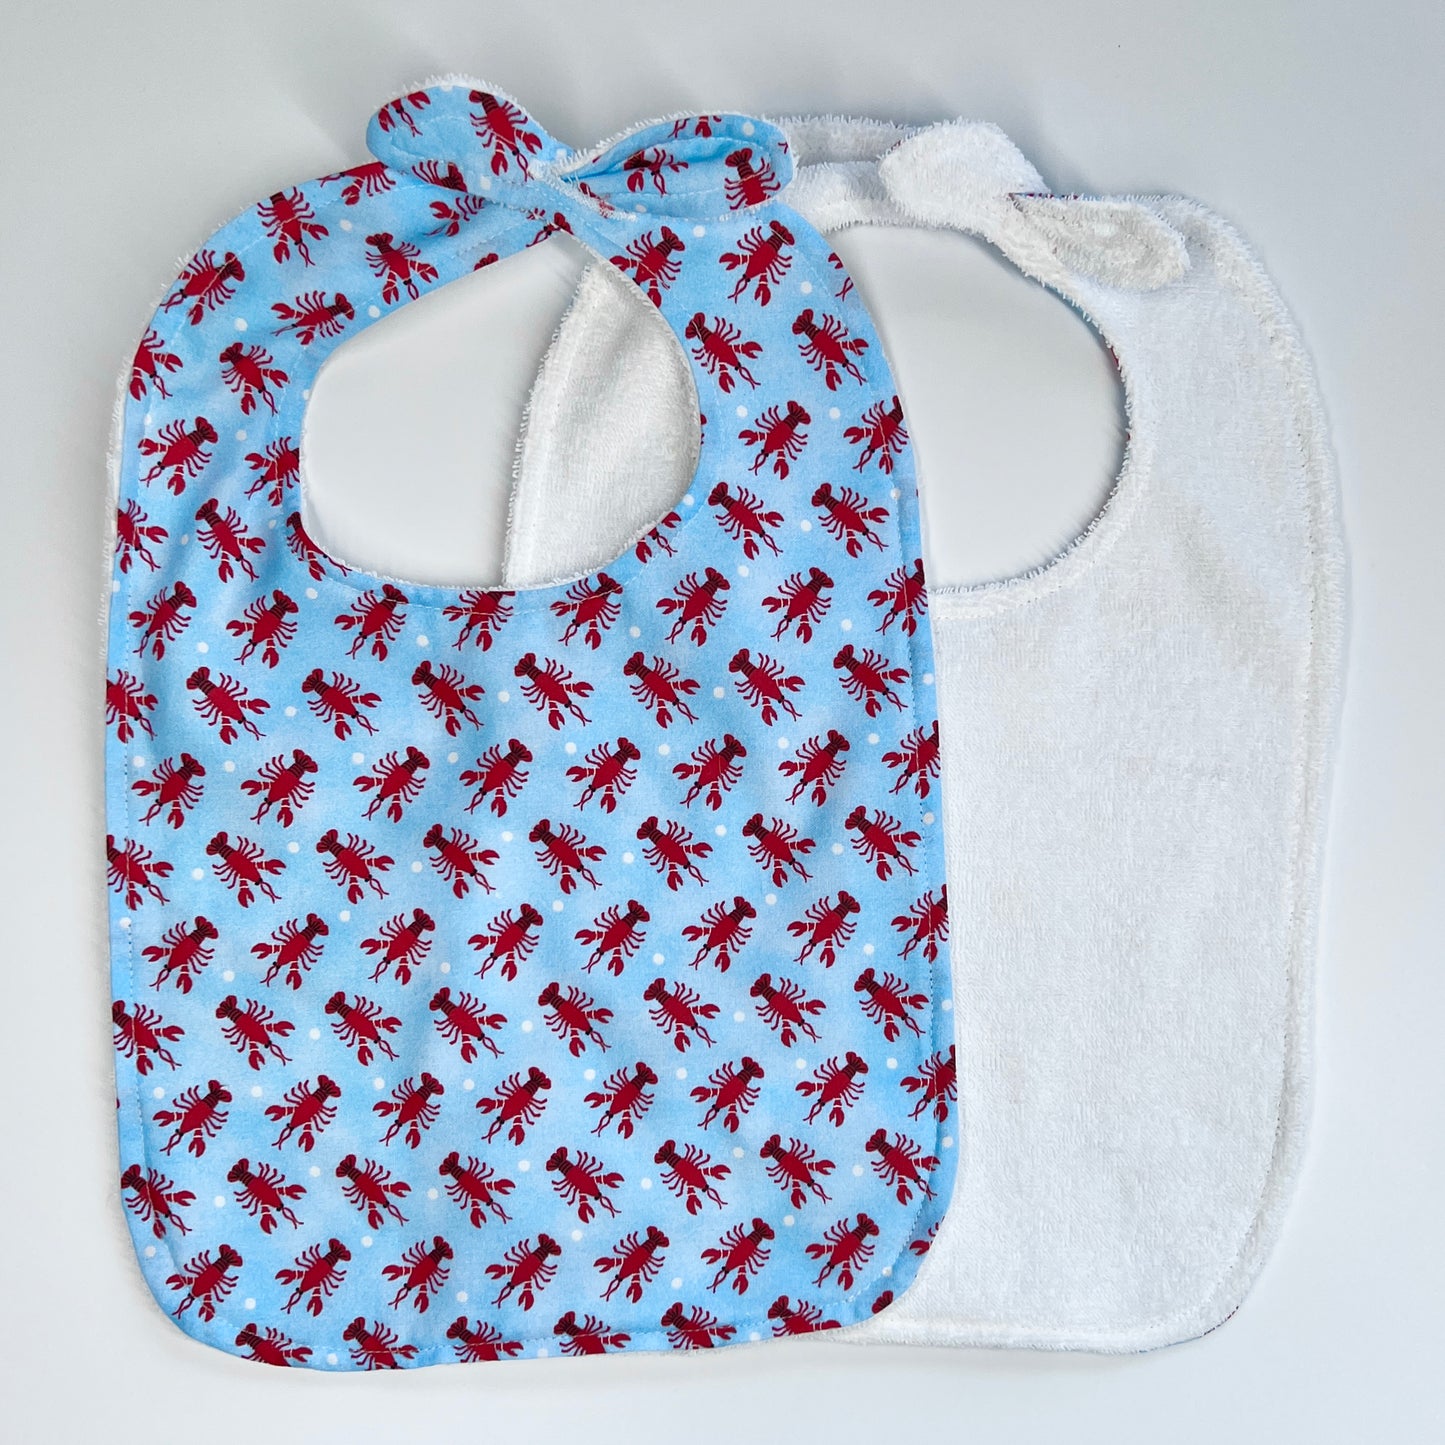 Square baby bib with reversible towel side "Lobsters"